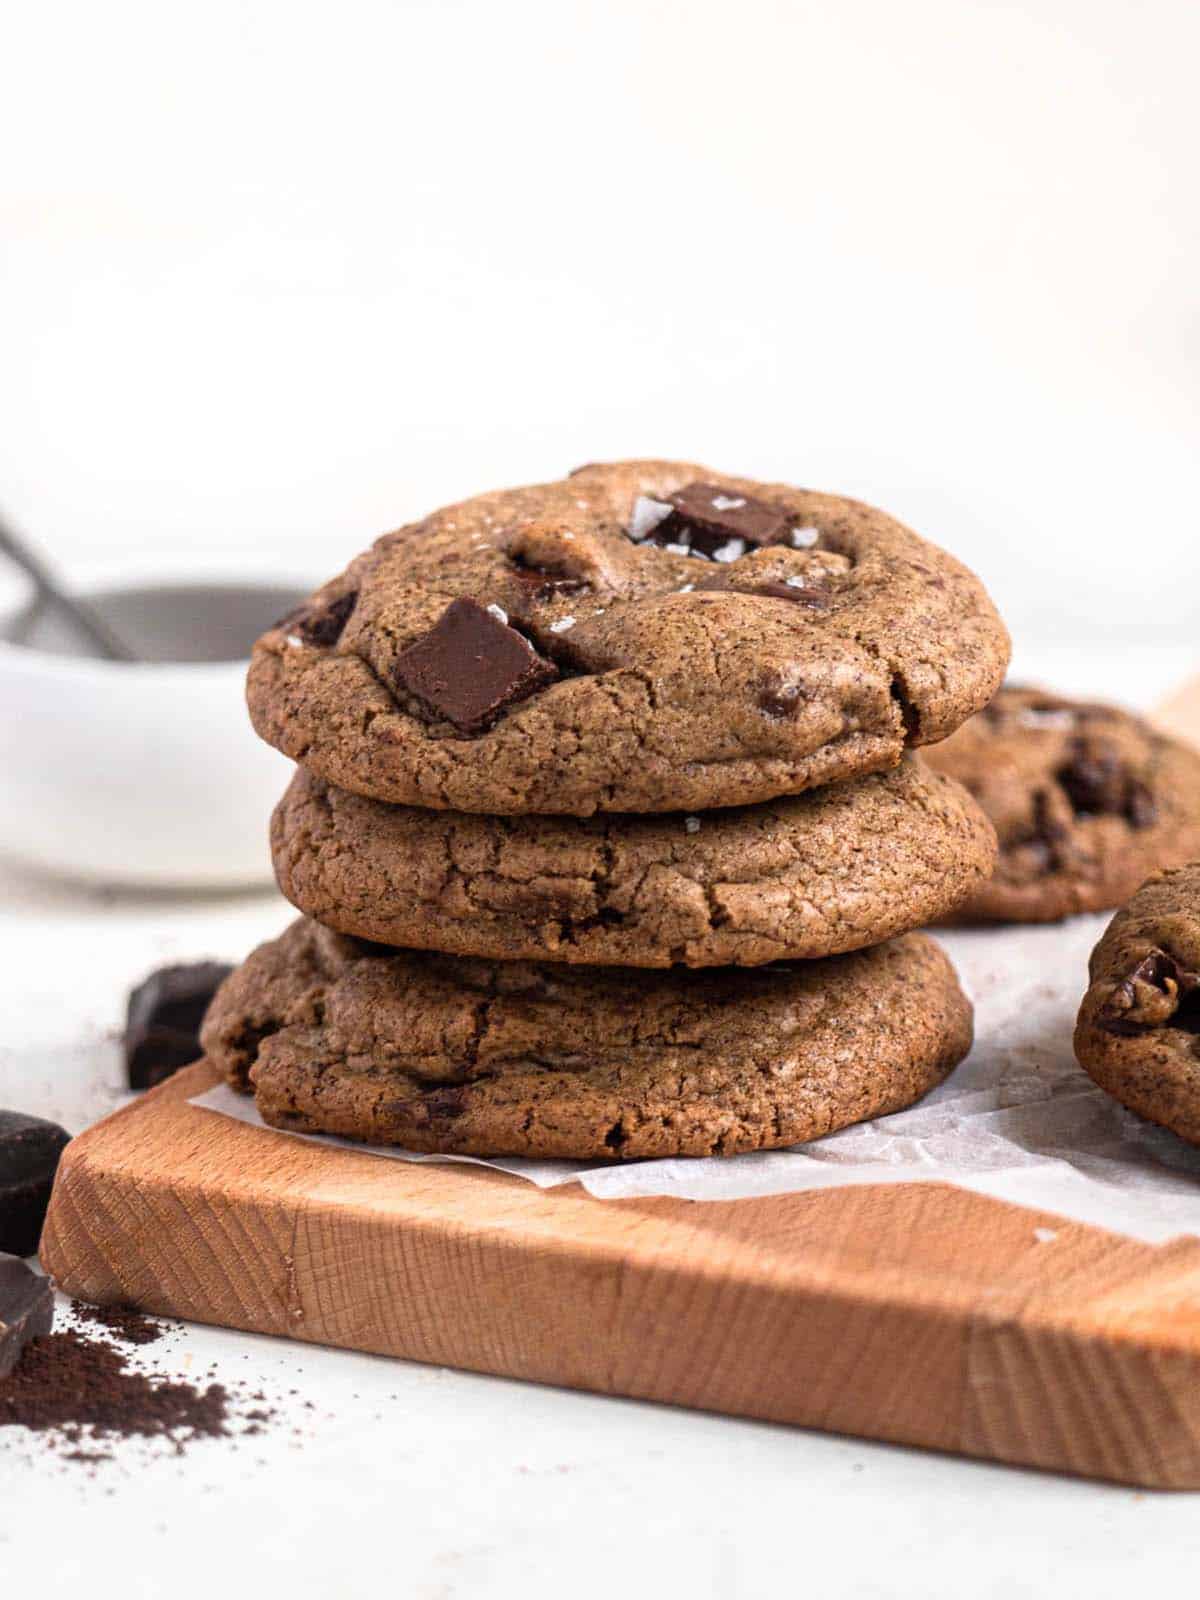 Chewy espresso chocolate chip cookies with coffee and flakey salt